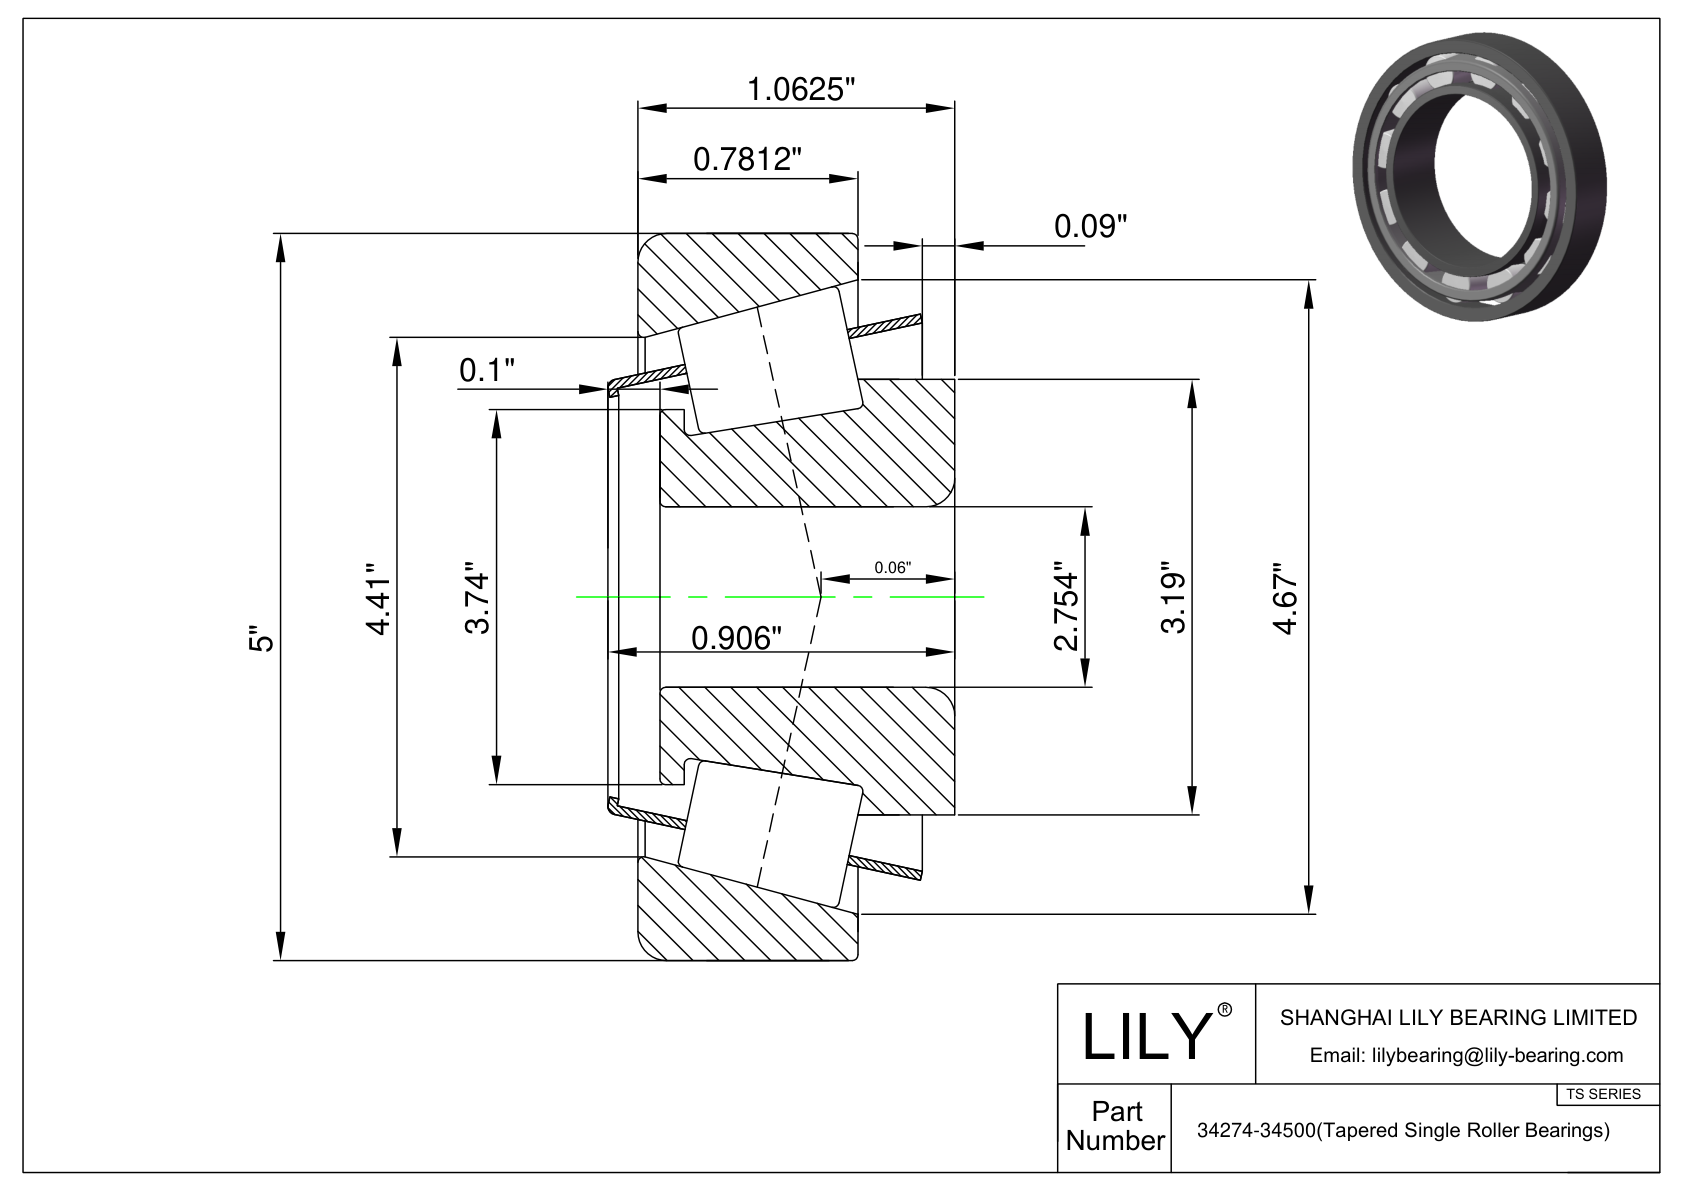 34274-34500 TS (Tapered Single Roller Bearings) (Imperial) cad drawing